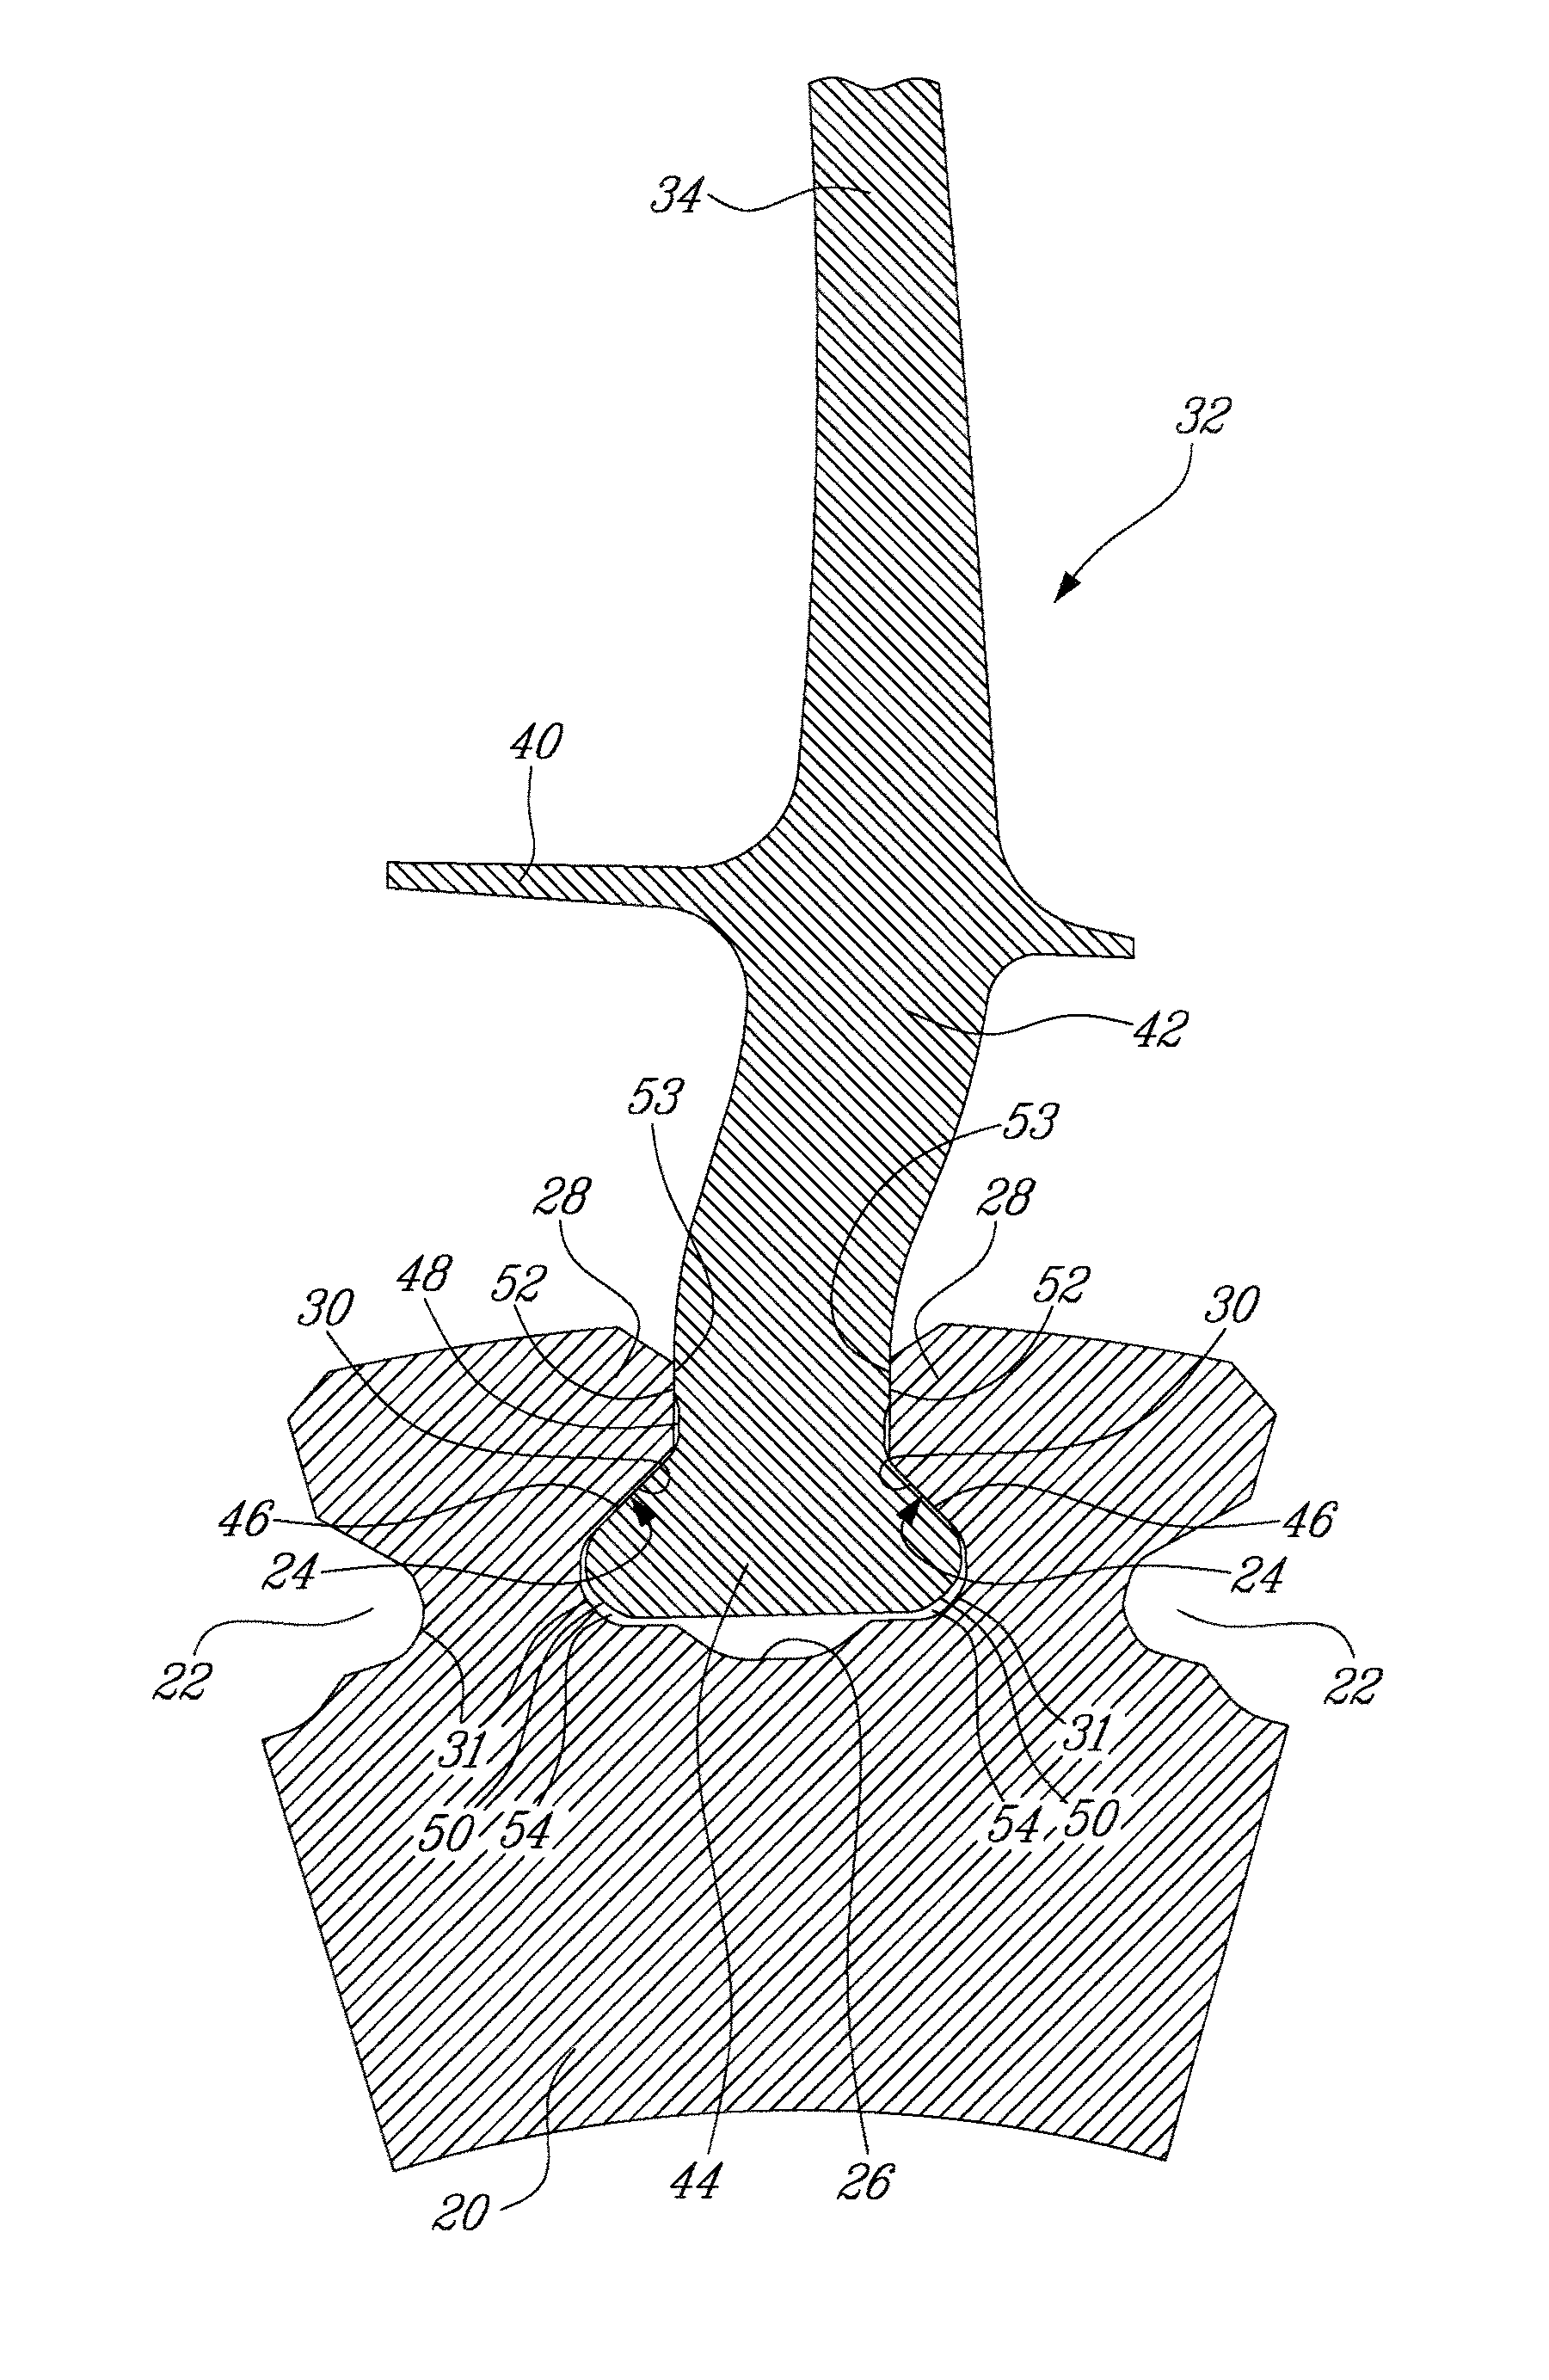 Blade fixing design for protecting against low speed rotation induced wear